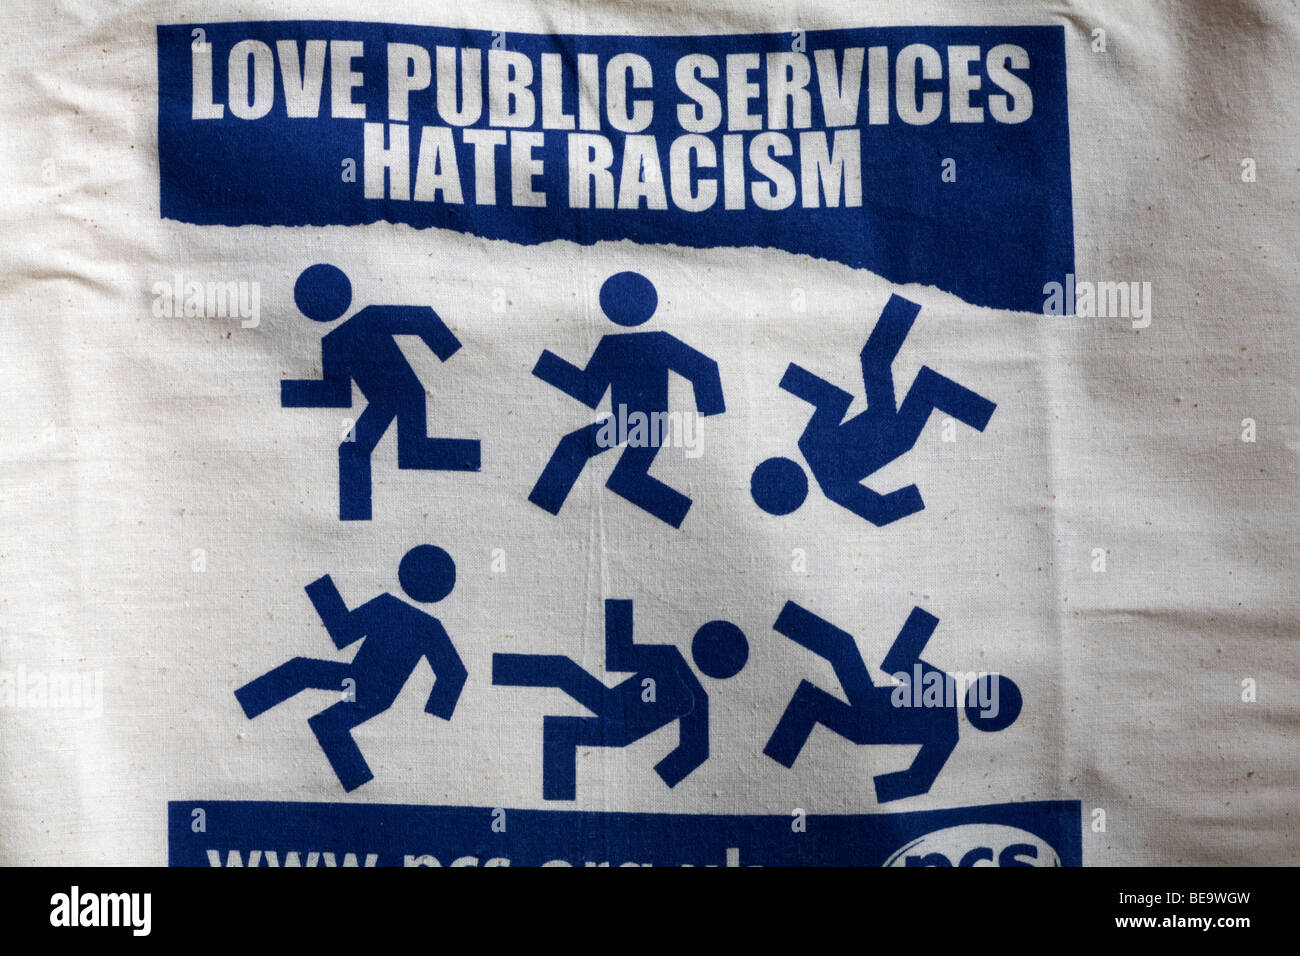 Close up of detail on canvas bag - Love public services hate racism shopping bag Stock Photo